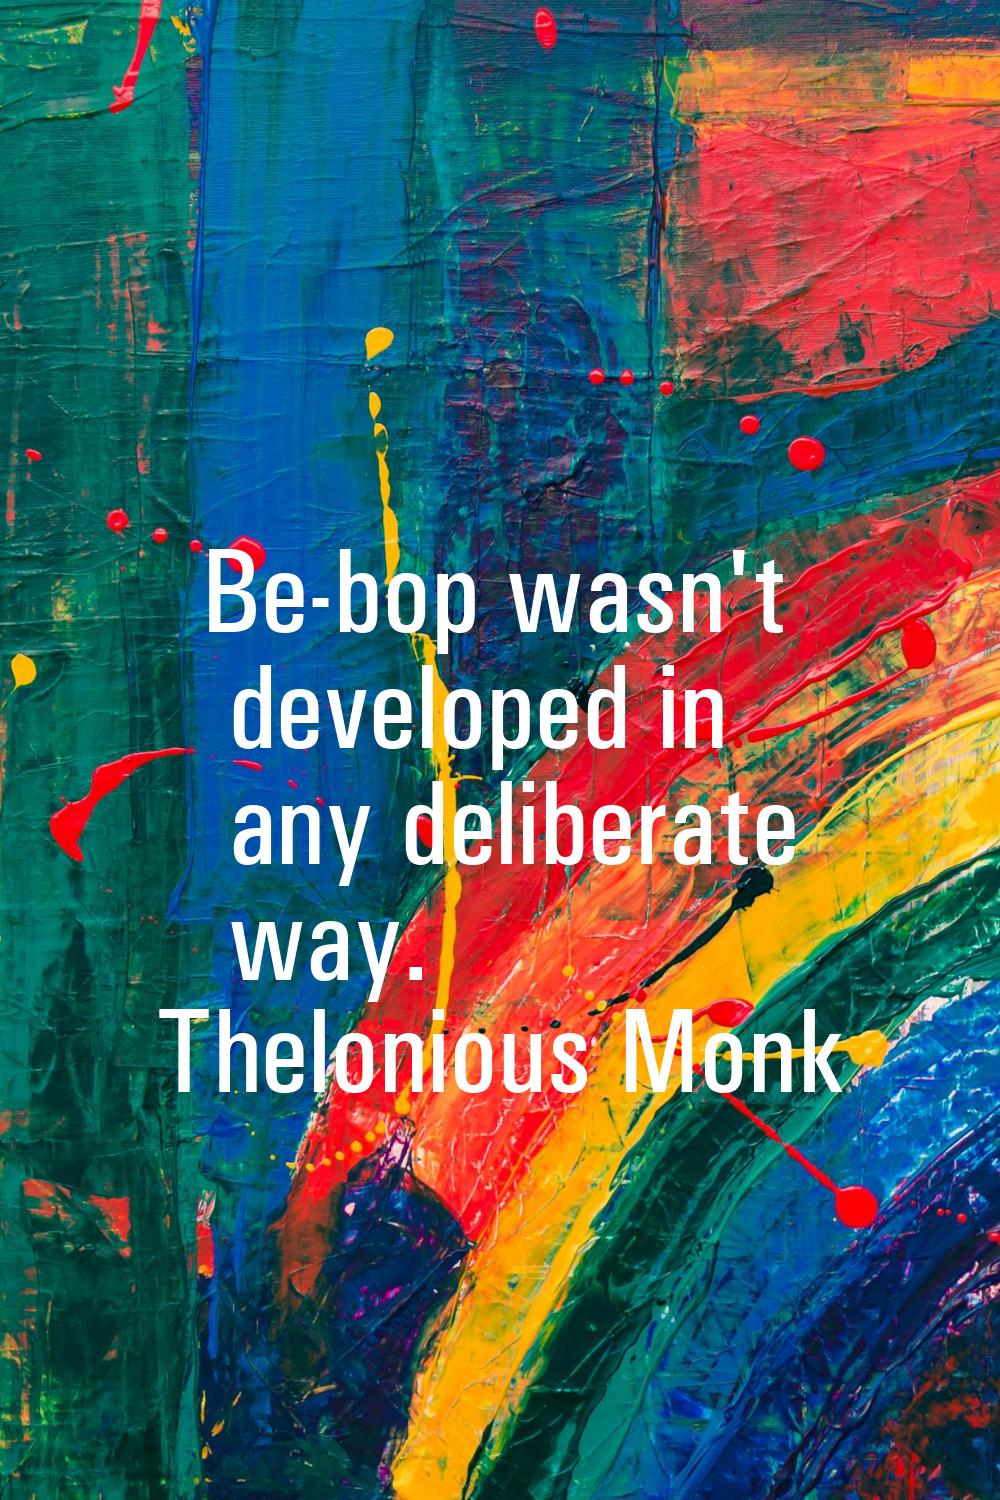 Be-bop wasn't developed in any deliberate way.